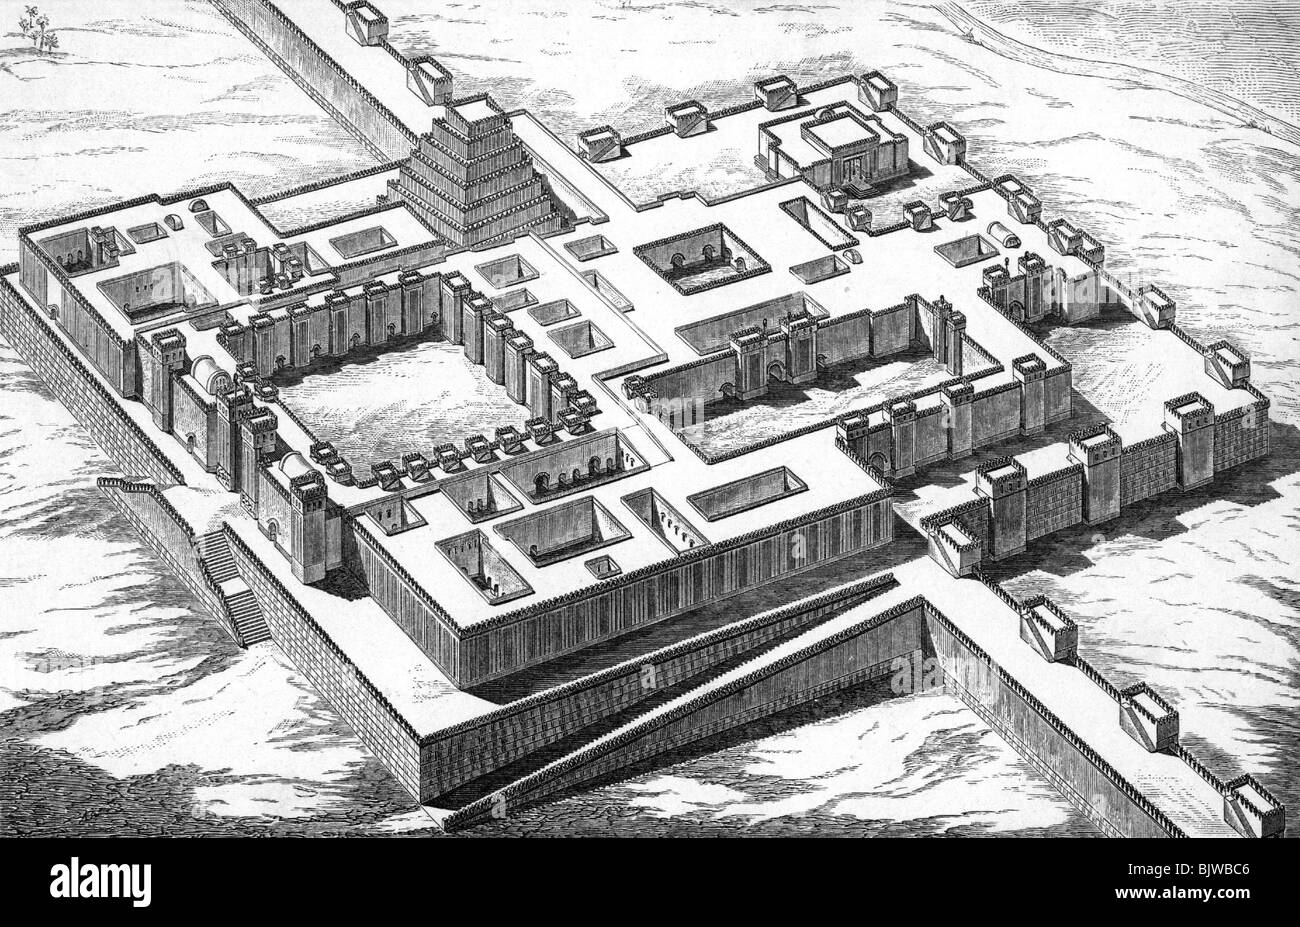 ancient world, Assyria, architecture, palace of King Sargon in Khorsabad, reconstruction after Perrot, wood engraving, 19th century, historic, historical, fortress, fortresses, Ziggurat, Dur-Sharrukin, fort, forts, castle, castles, building, buildings, ancient world, people, Stock Photo